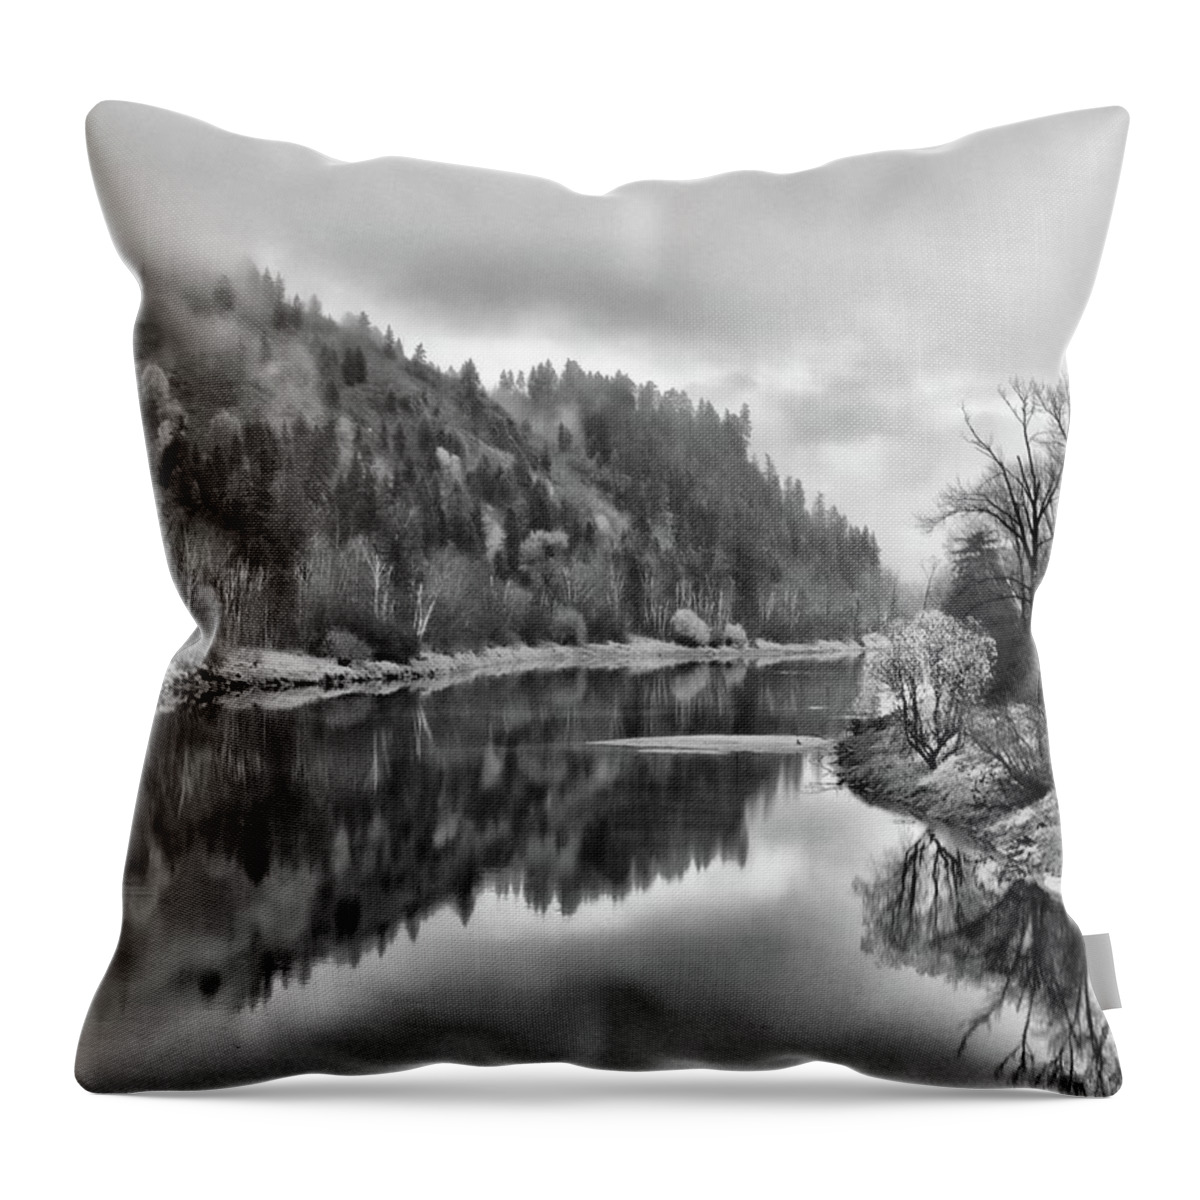 Grindrod Throw Pillow featuring the photograph Shuswap River Black and White by Allan Van Gasbeck